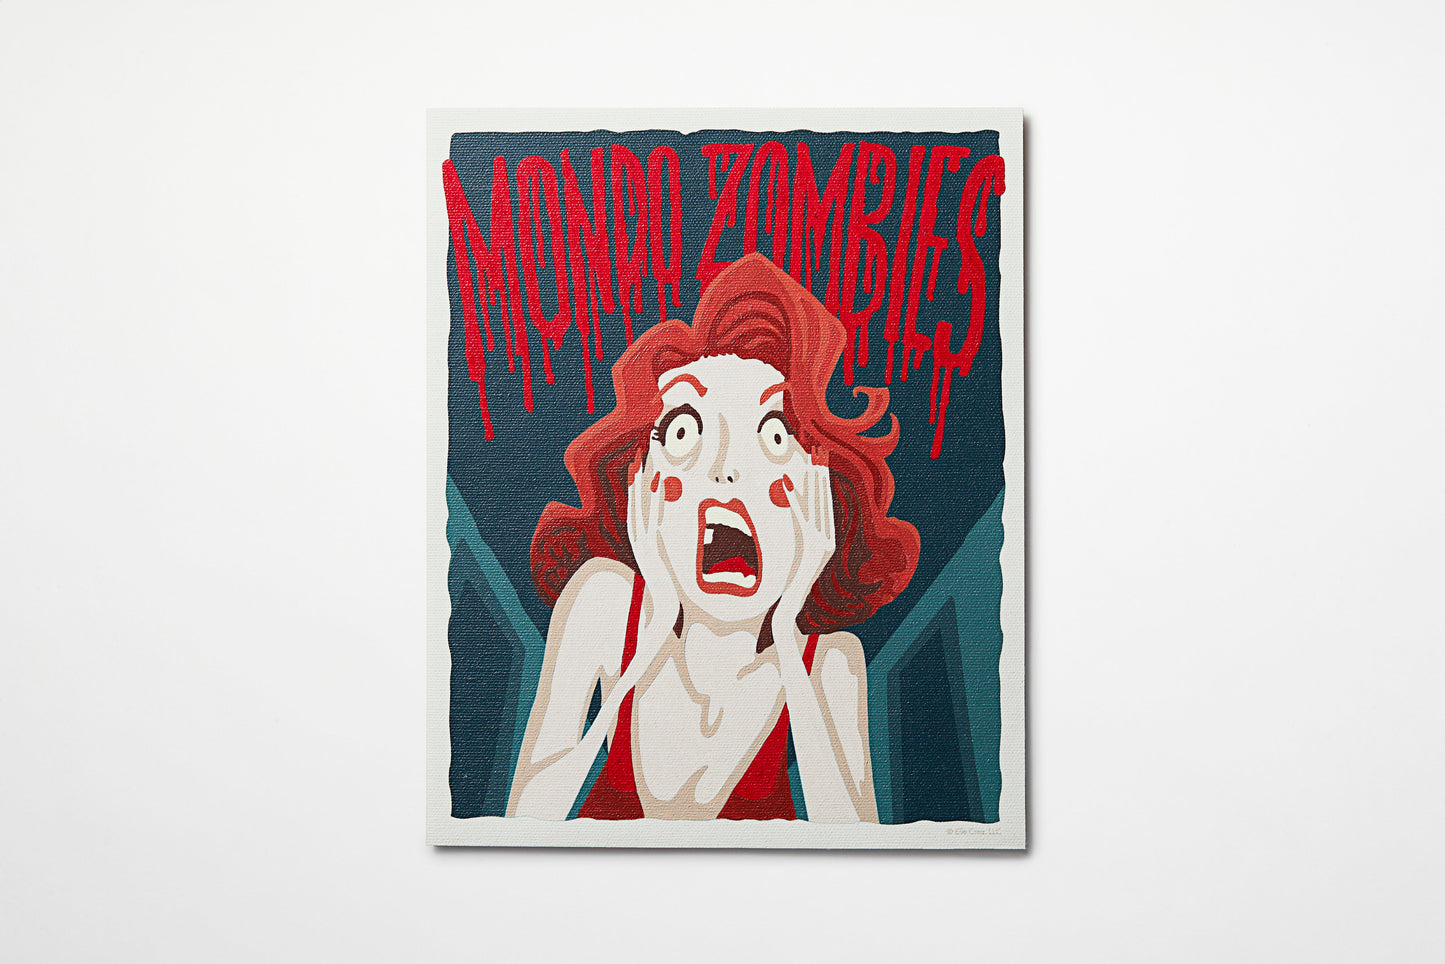 ParaNorman Mondo Zombies Paint-by-Number Kit